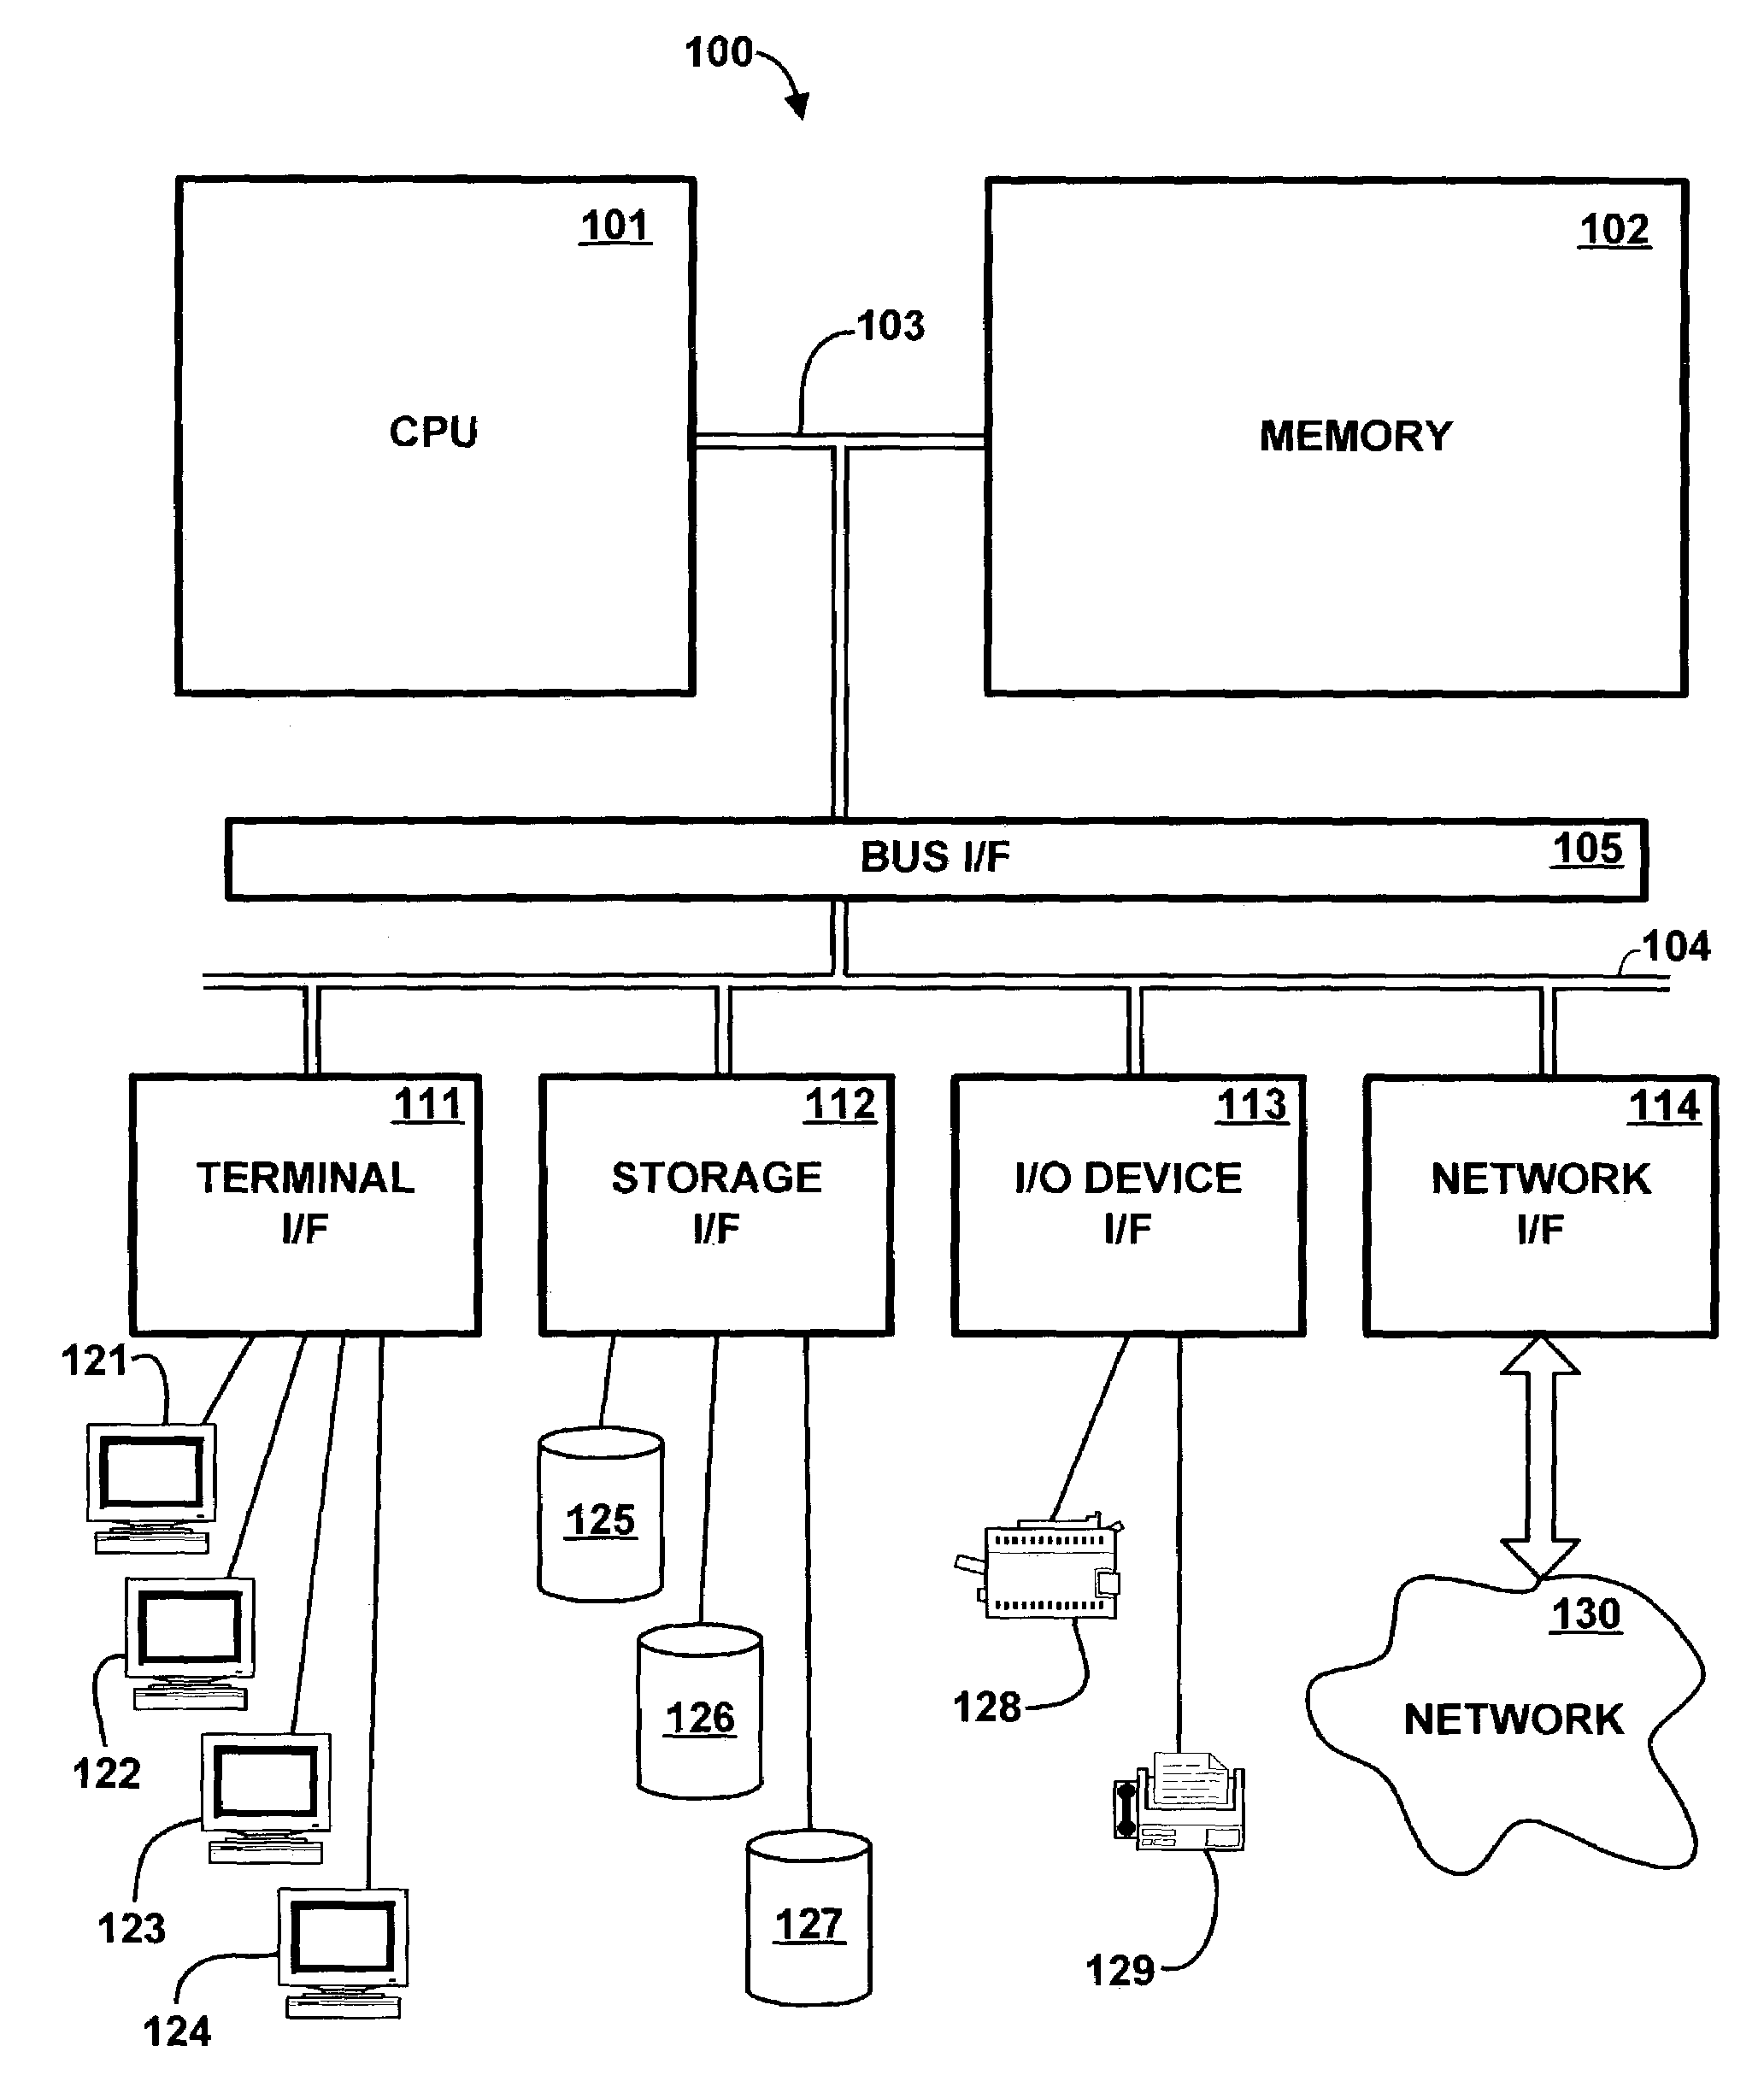 Method and apparatus for obtaining profile data for use in optimizing computer programming code